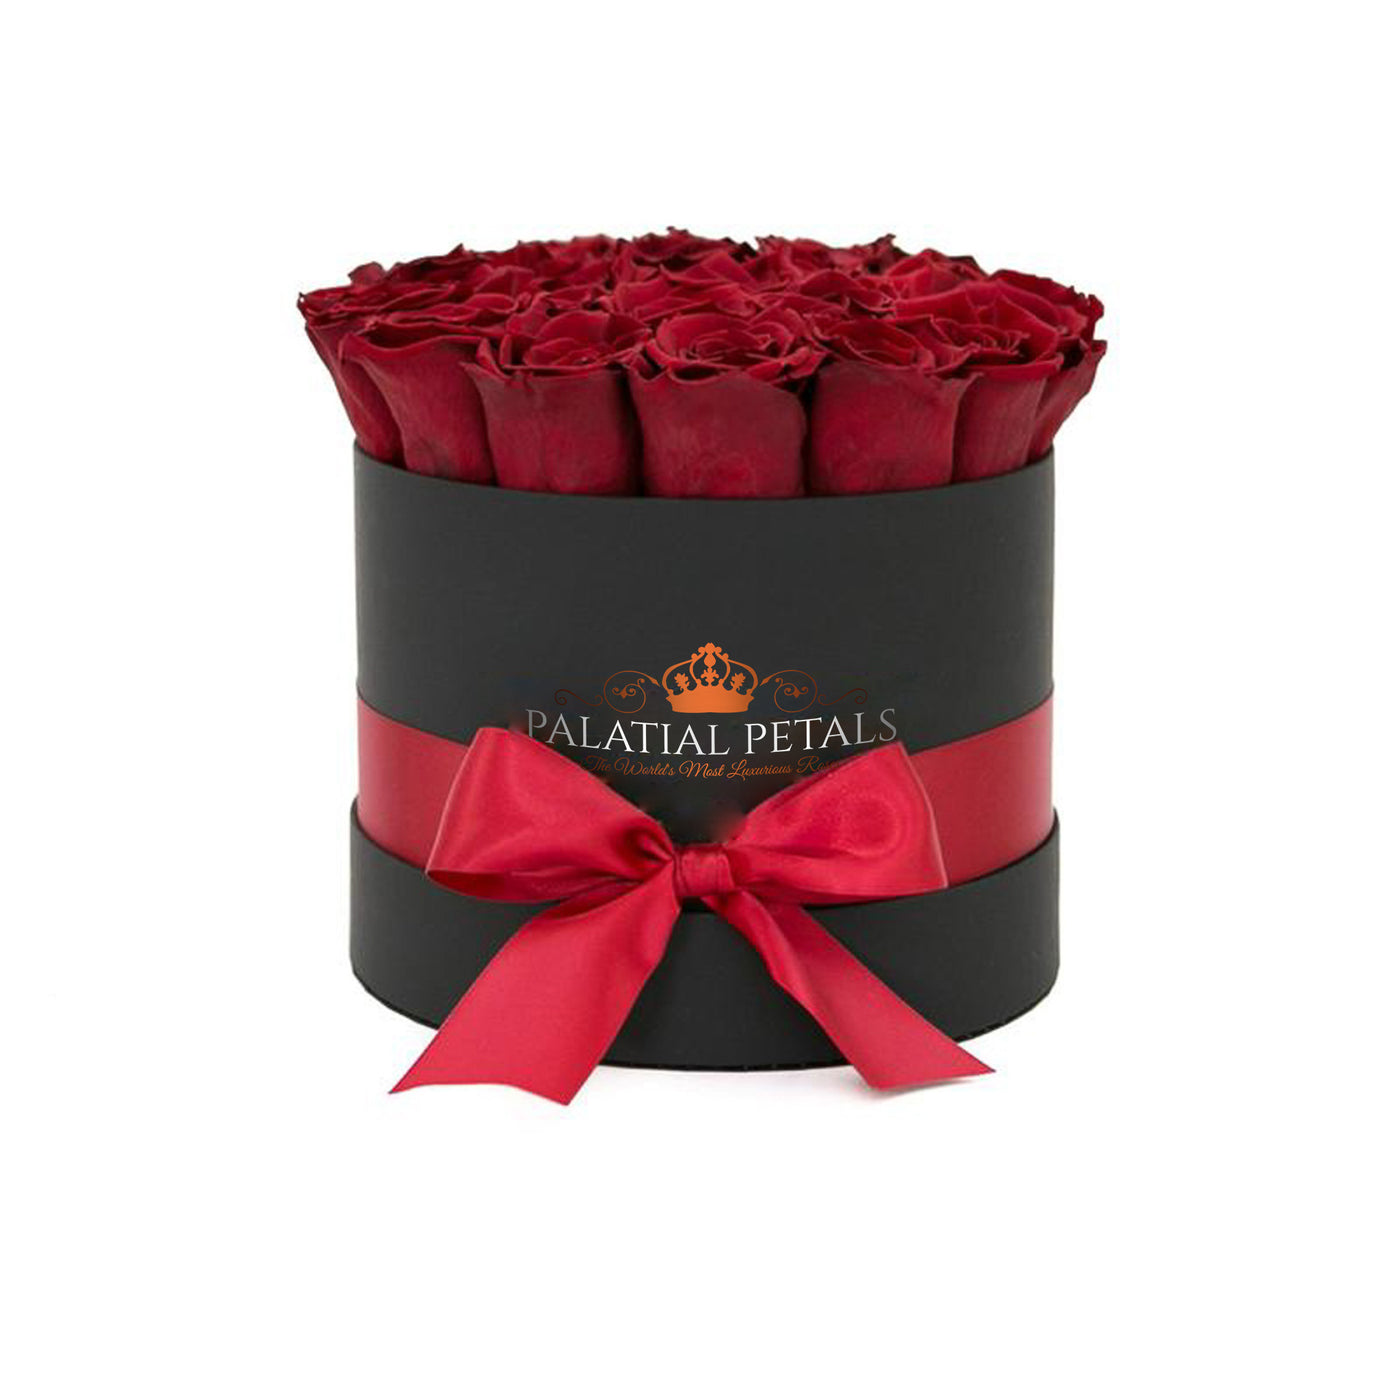 Red Roses That Last A Year - Classic Rose Box